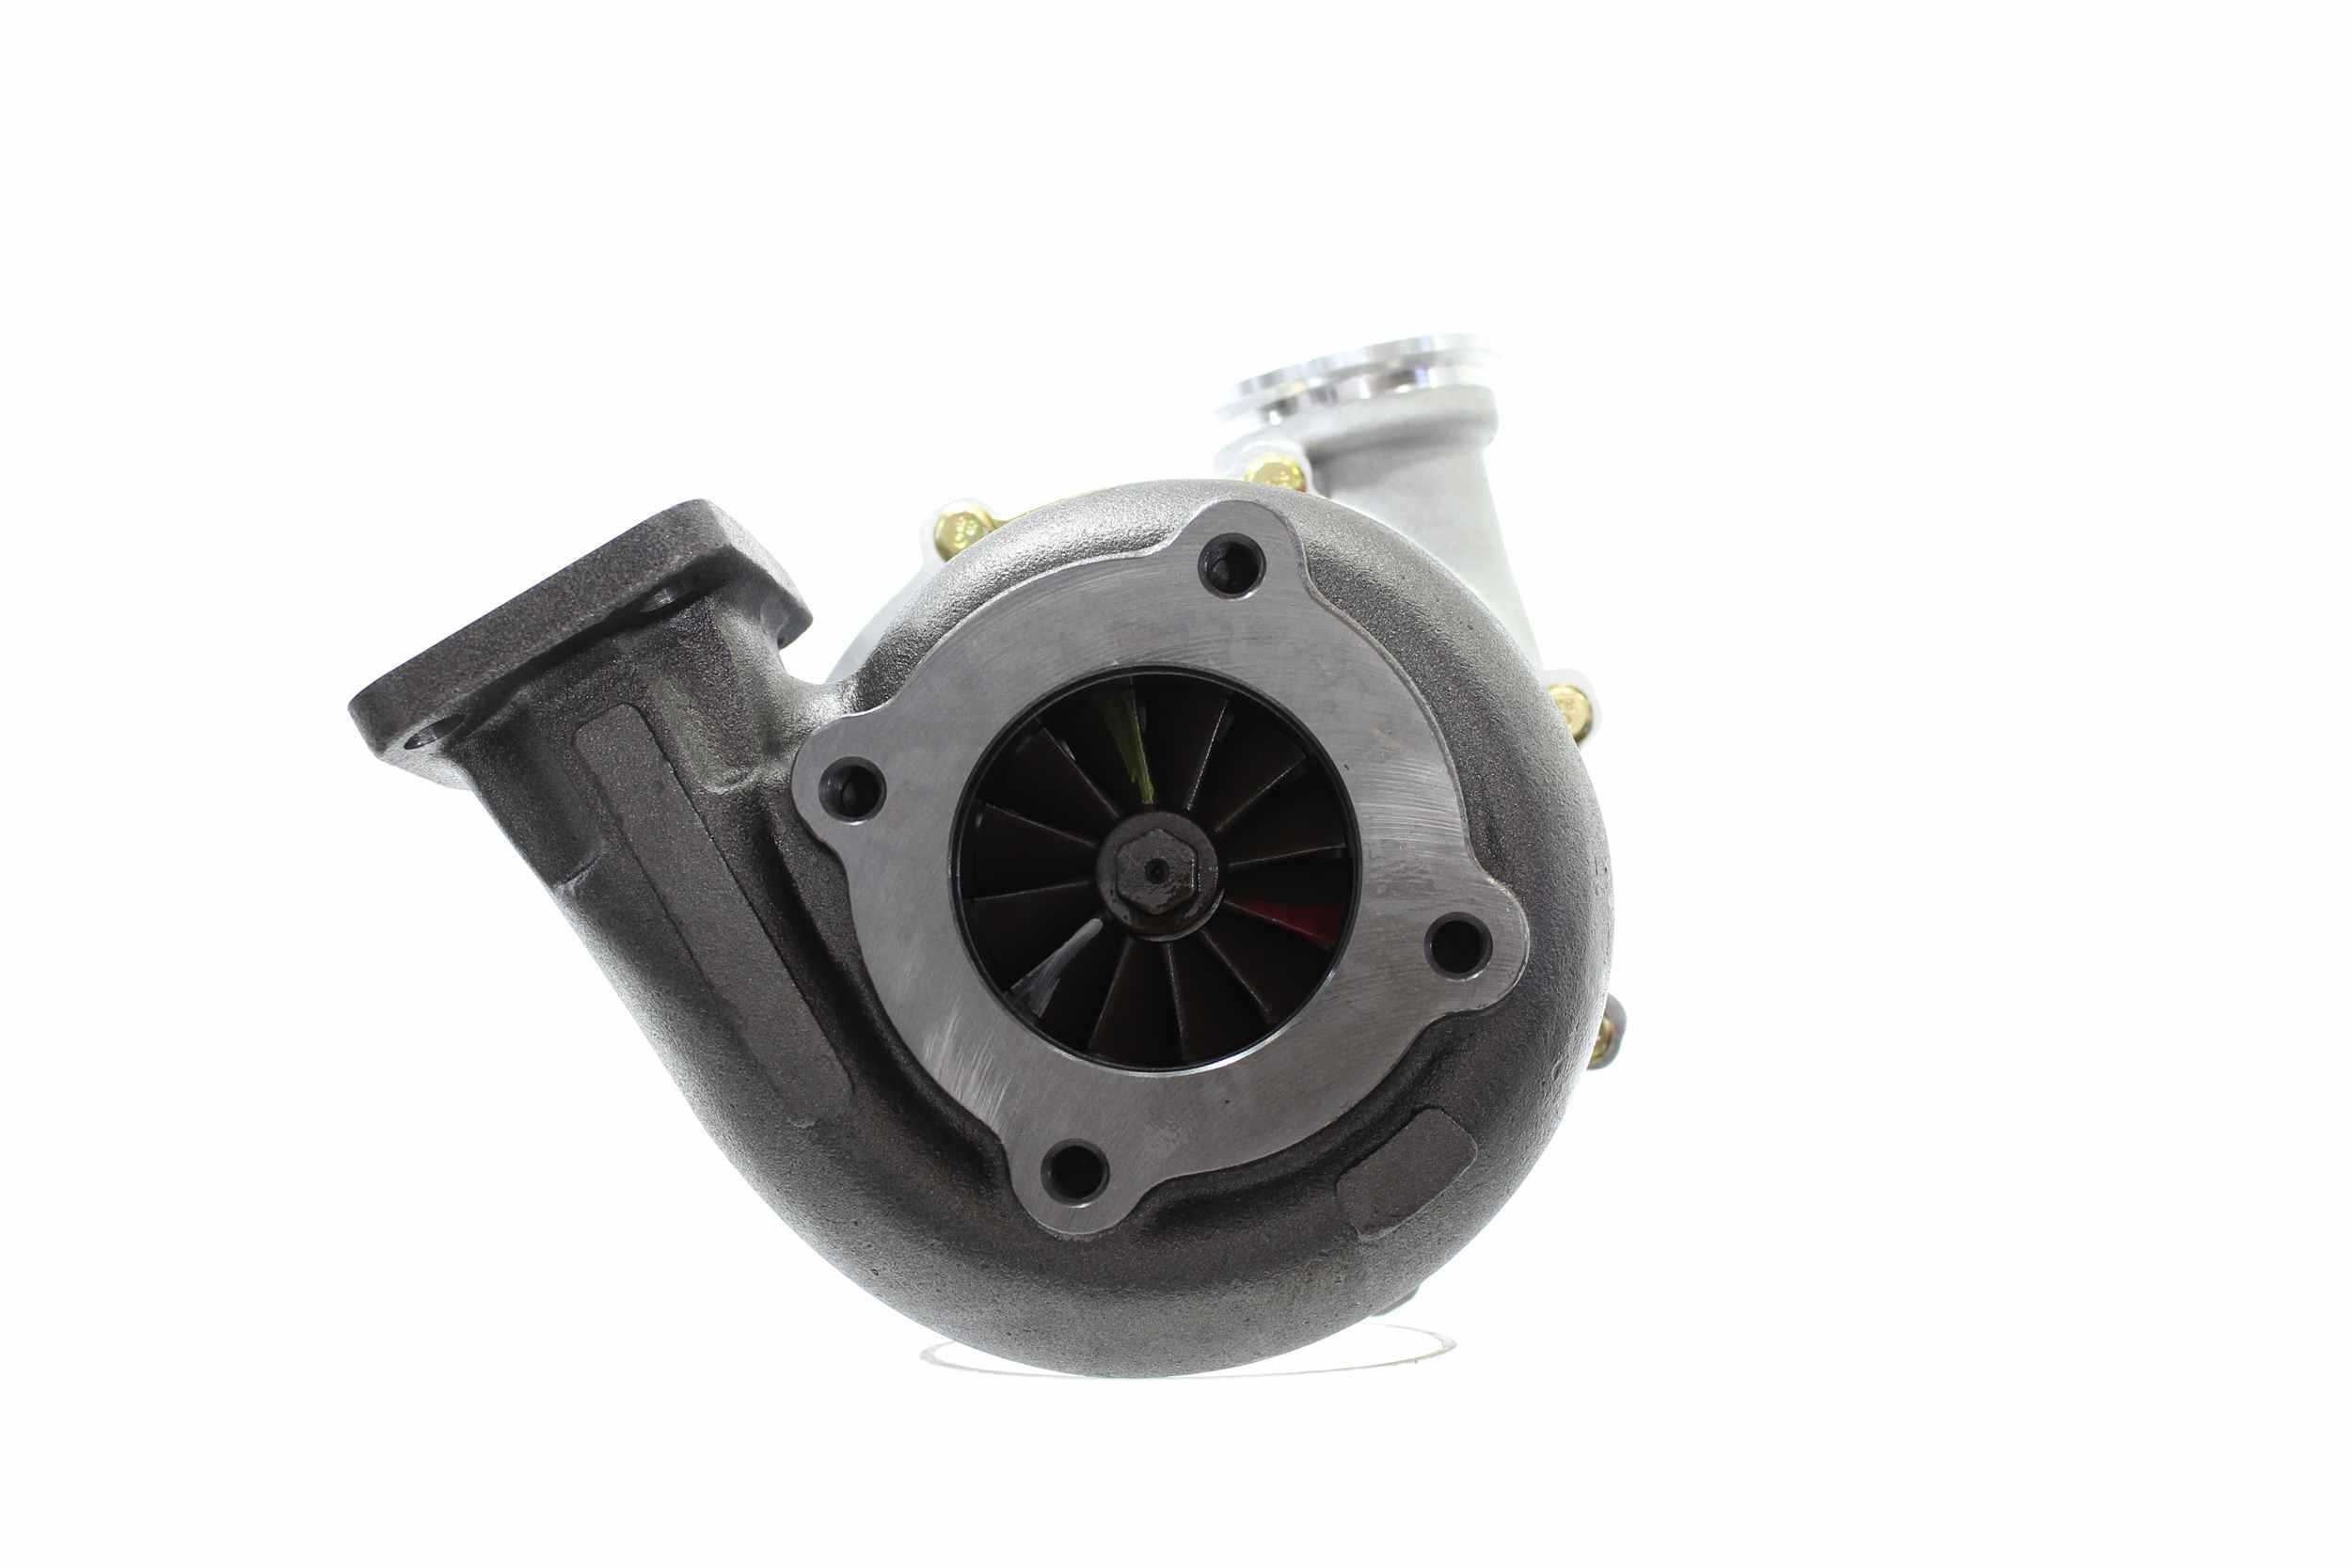 ALANKO 11900055 Turbo Exhaust Turbocharger, Incl. Gasket Set, with attachment material